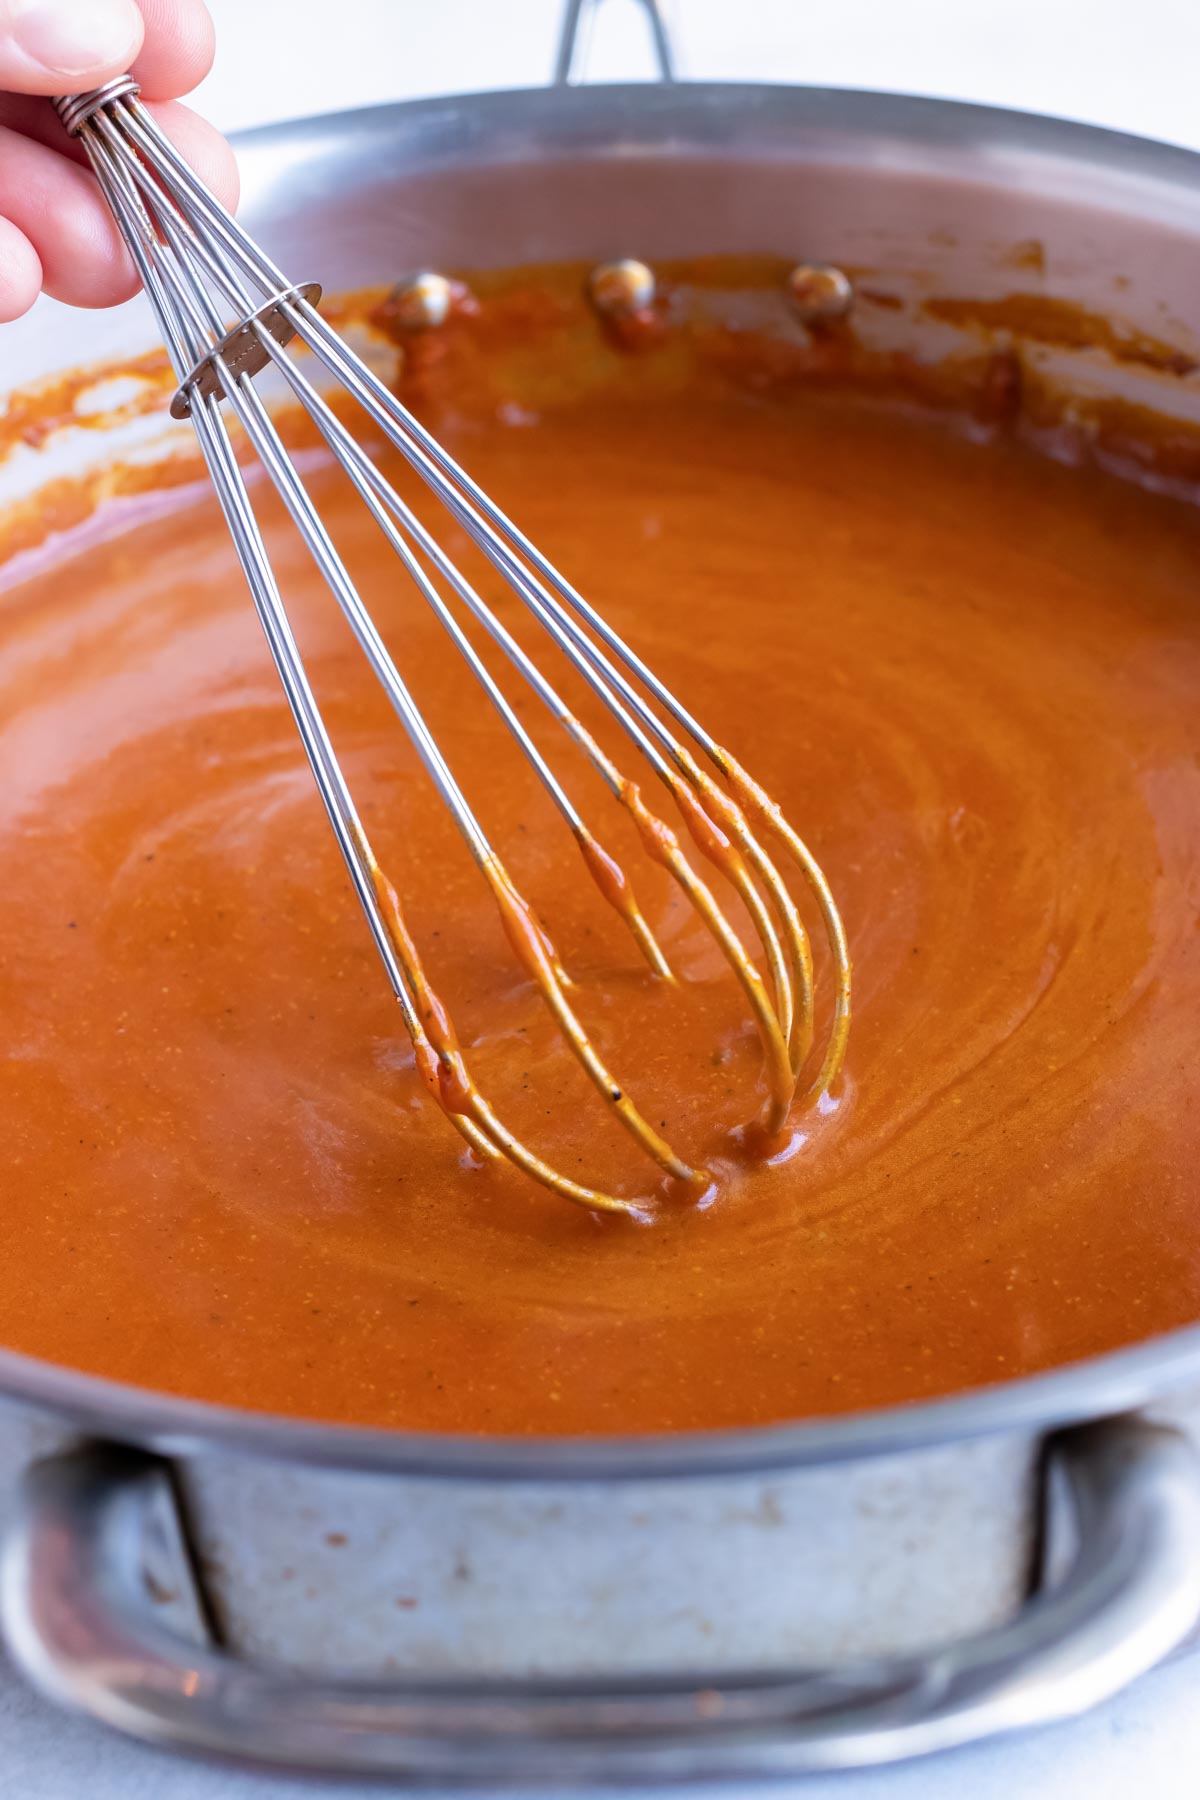 Whisking a red enchilada sauce in a skillet.